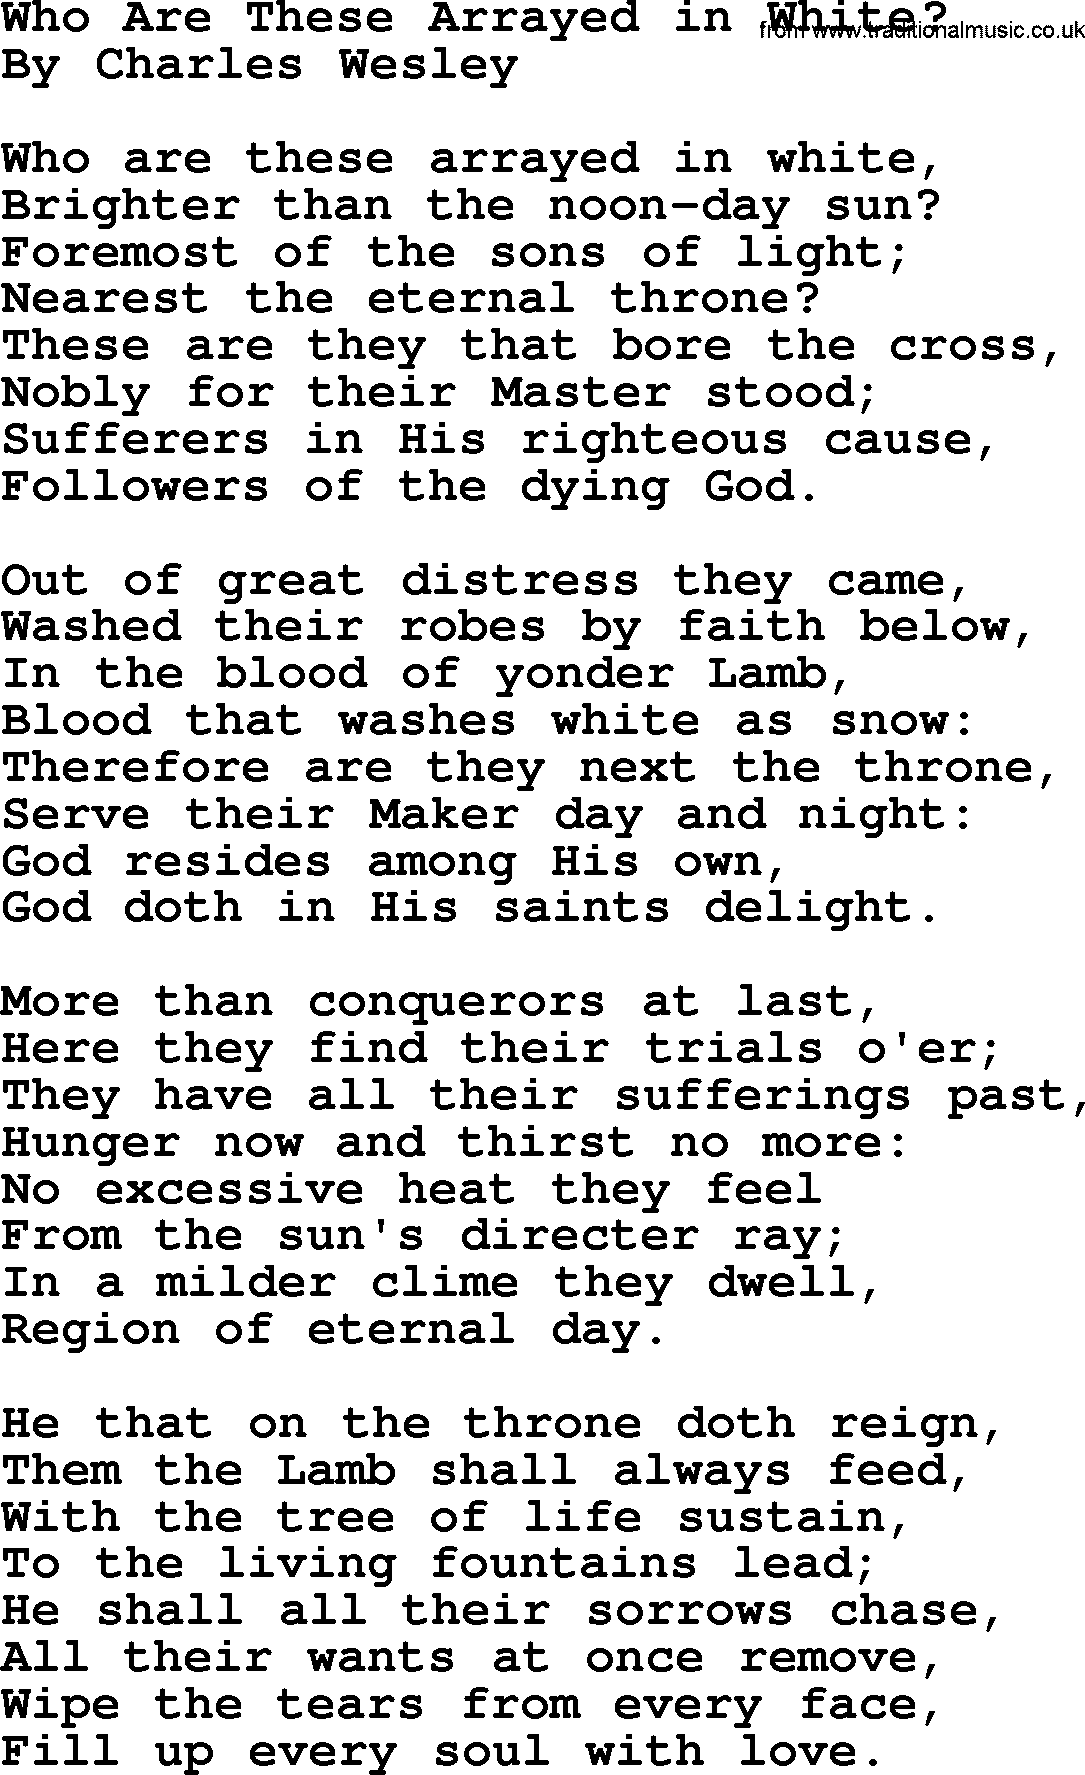 Charles Wesley hymn: Who Are These Arrayed in White_, lyrics